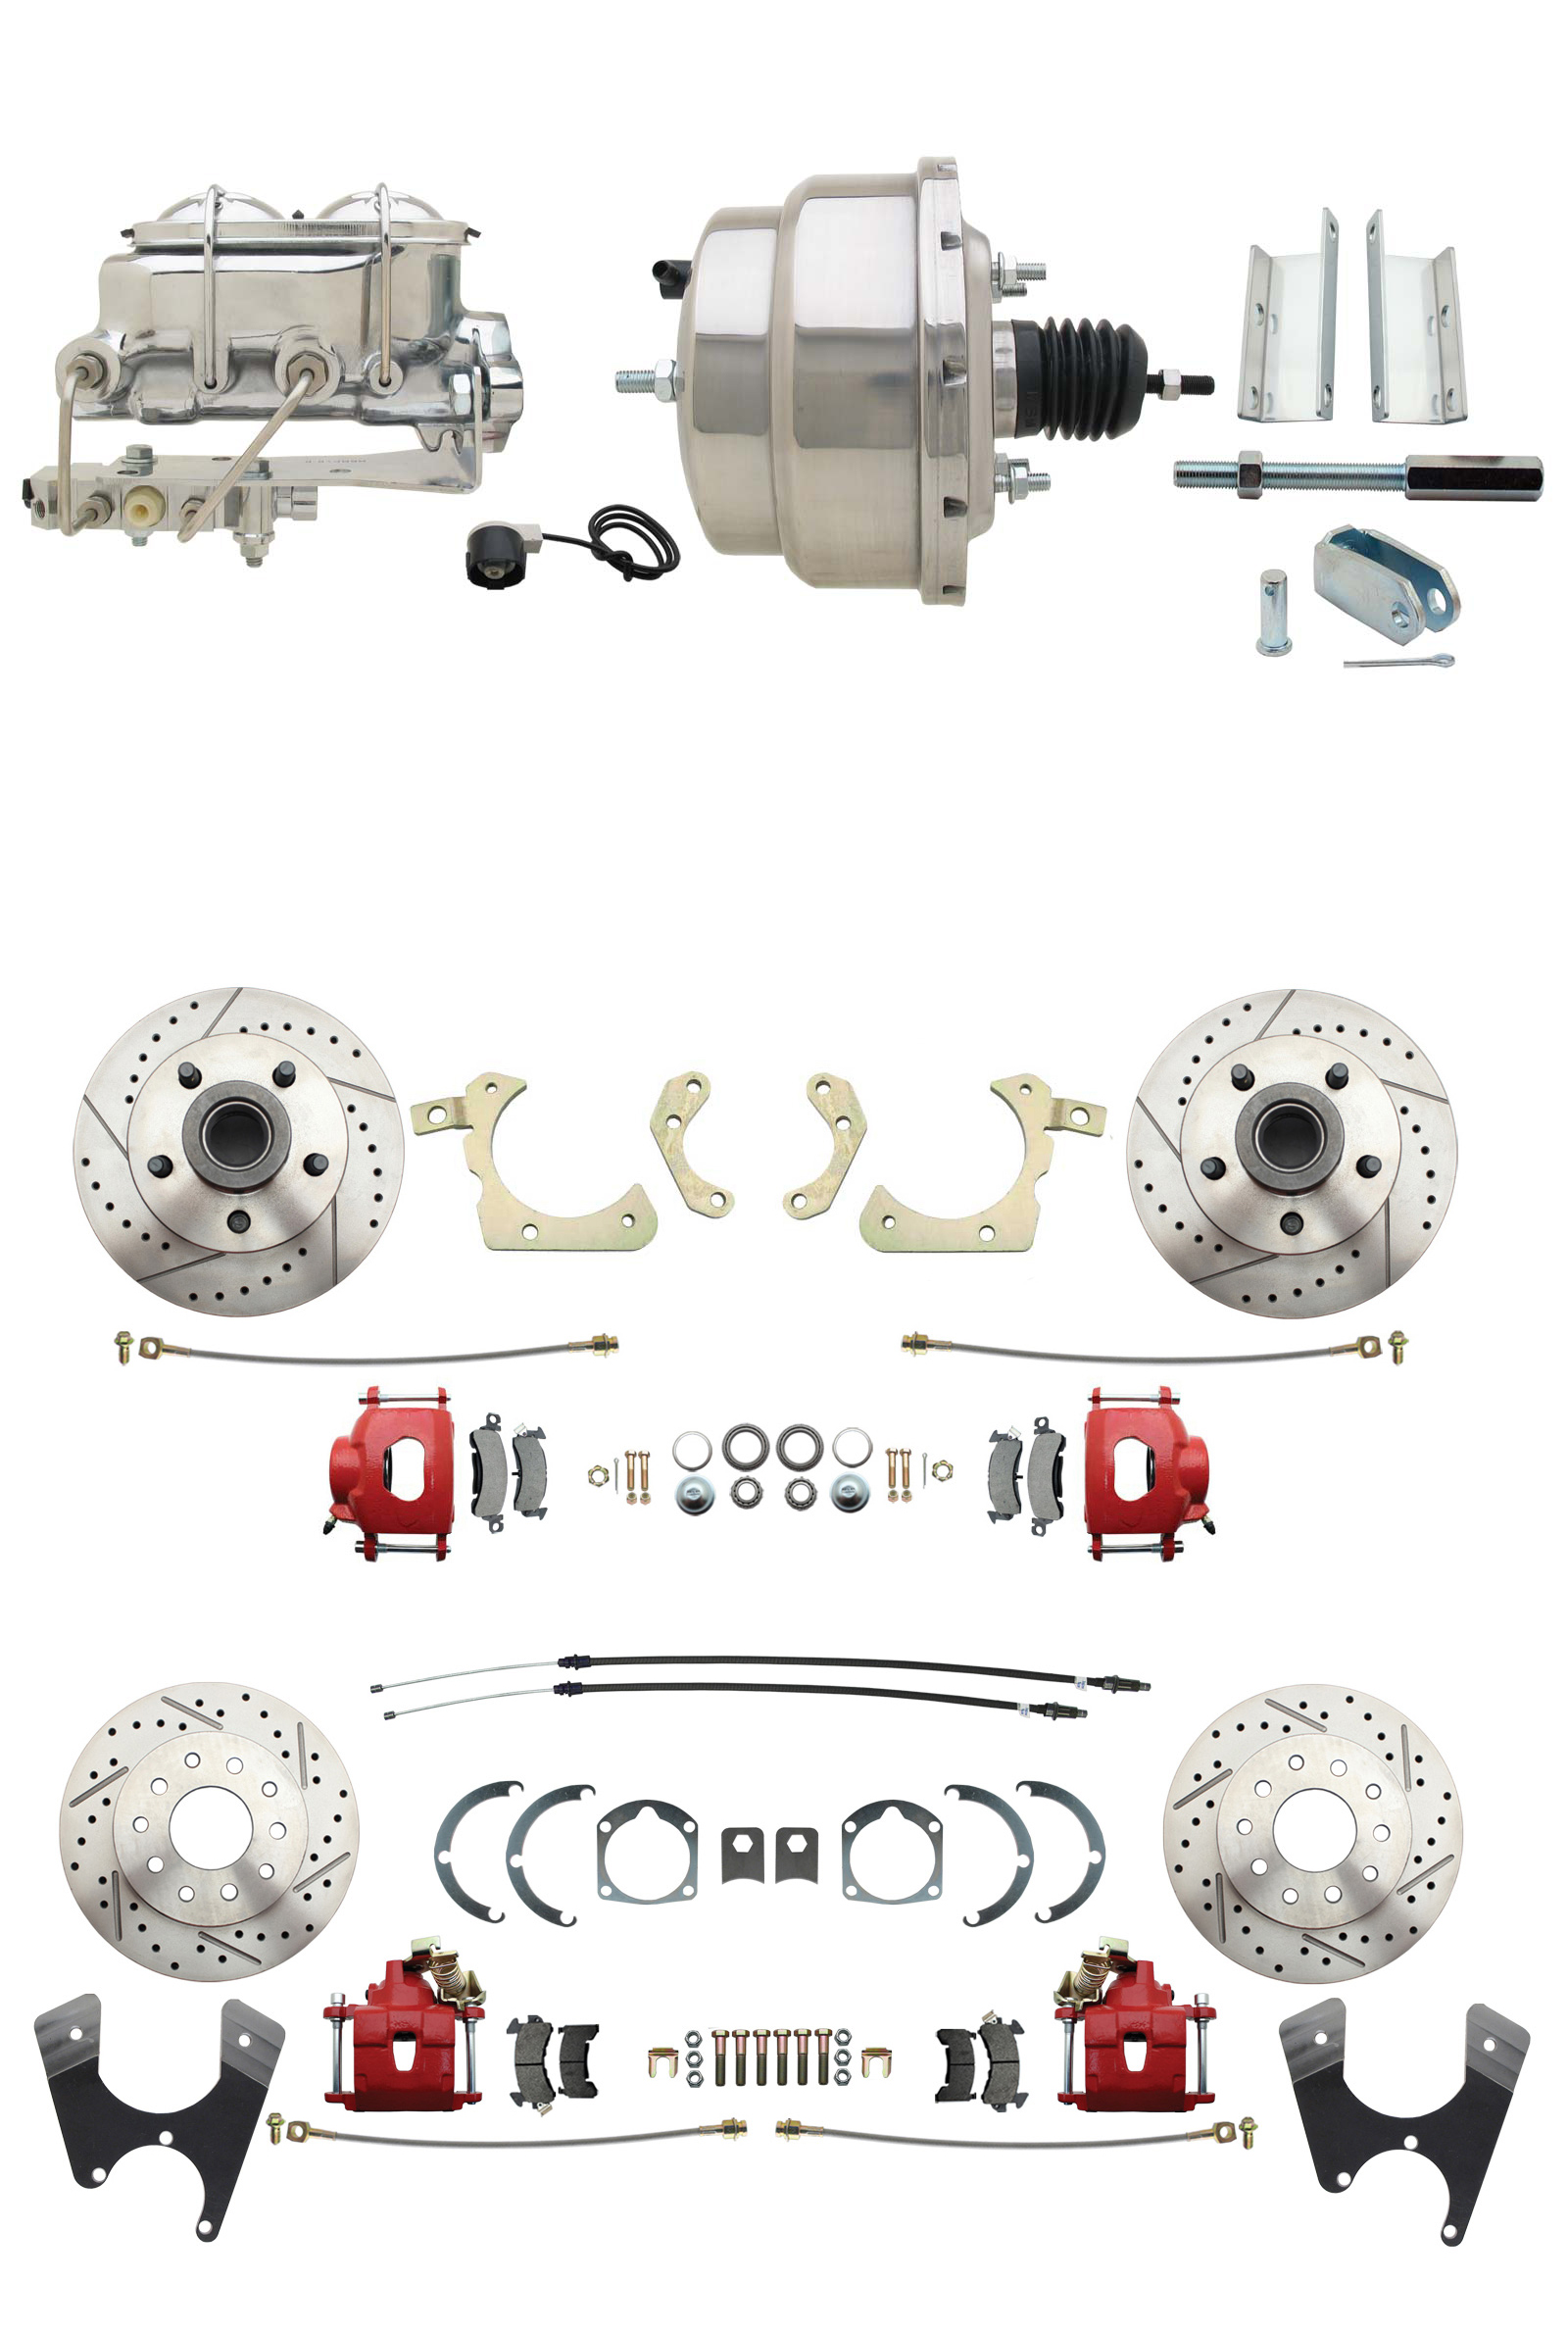 1955-1958 GM Full Size Front & Rear Power Disc Brake Kit Red Powder Coated Calipers Drilled/Slotted Rotors (Impala, Bel Air, Biscayne) & 8 Dual Stainless Steel Conversion Kit W/ Chrome Master Cylinder Bottom Mount Disc/